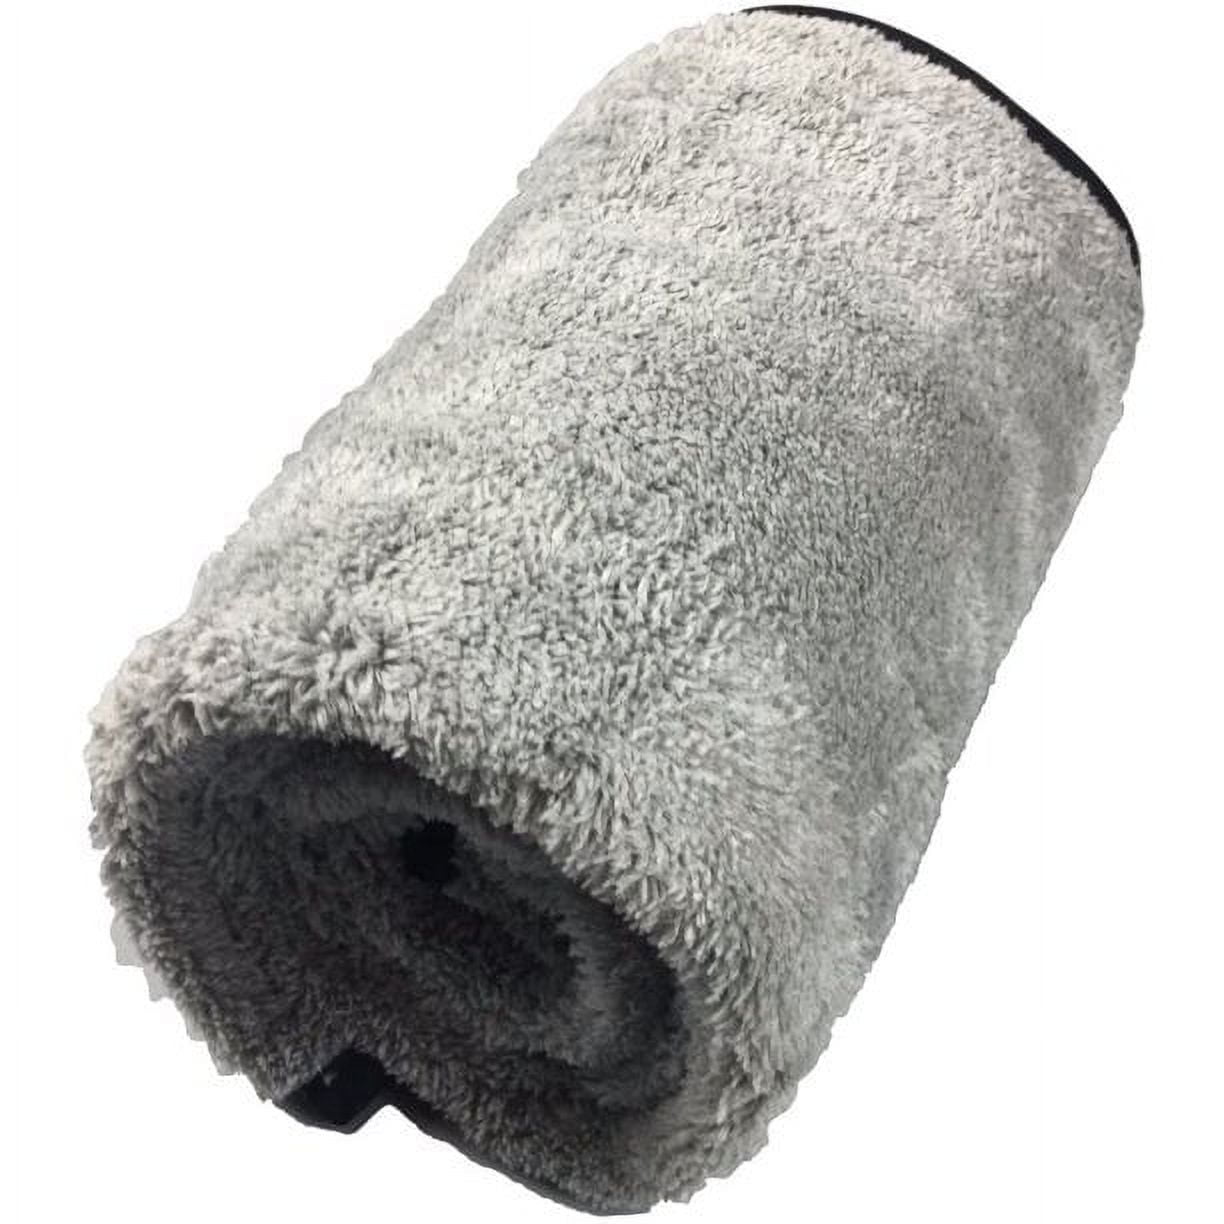 SHSCLY Microfiber Car Drying Towel Super Absorbent Twist Pile Car Towels  Rapid Drying Large Lint-Free Detailing Cloth Gray 19.7 x 23.6